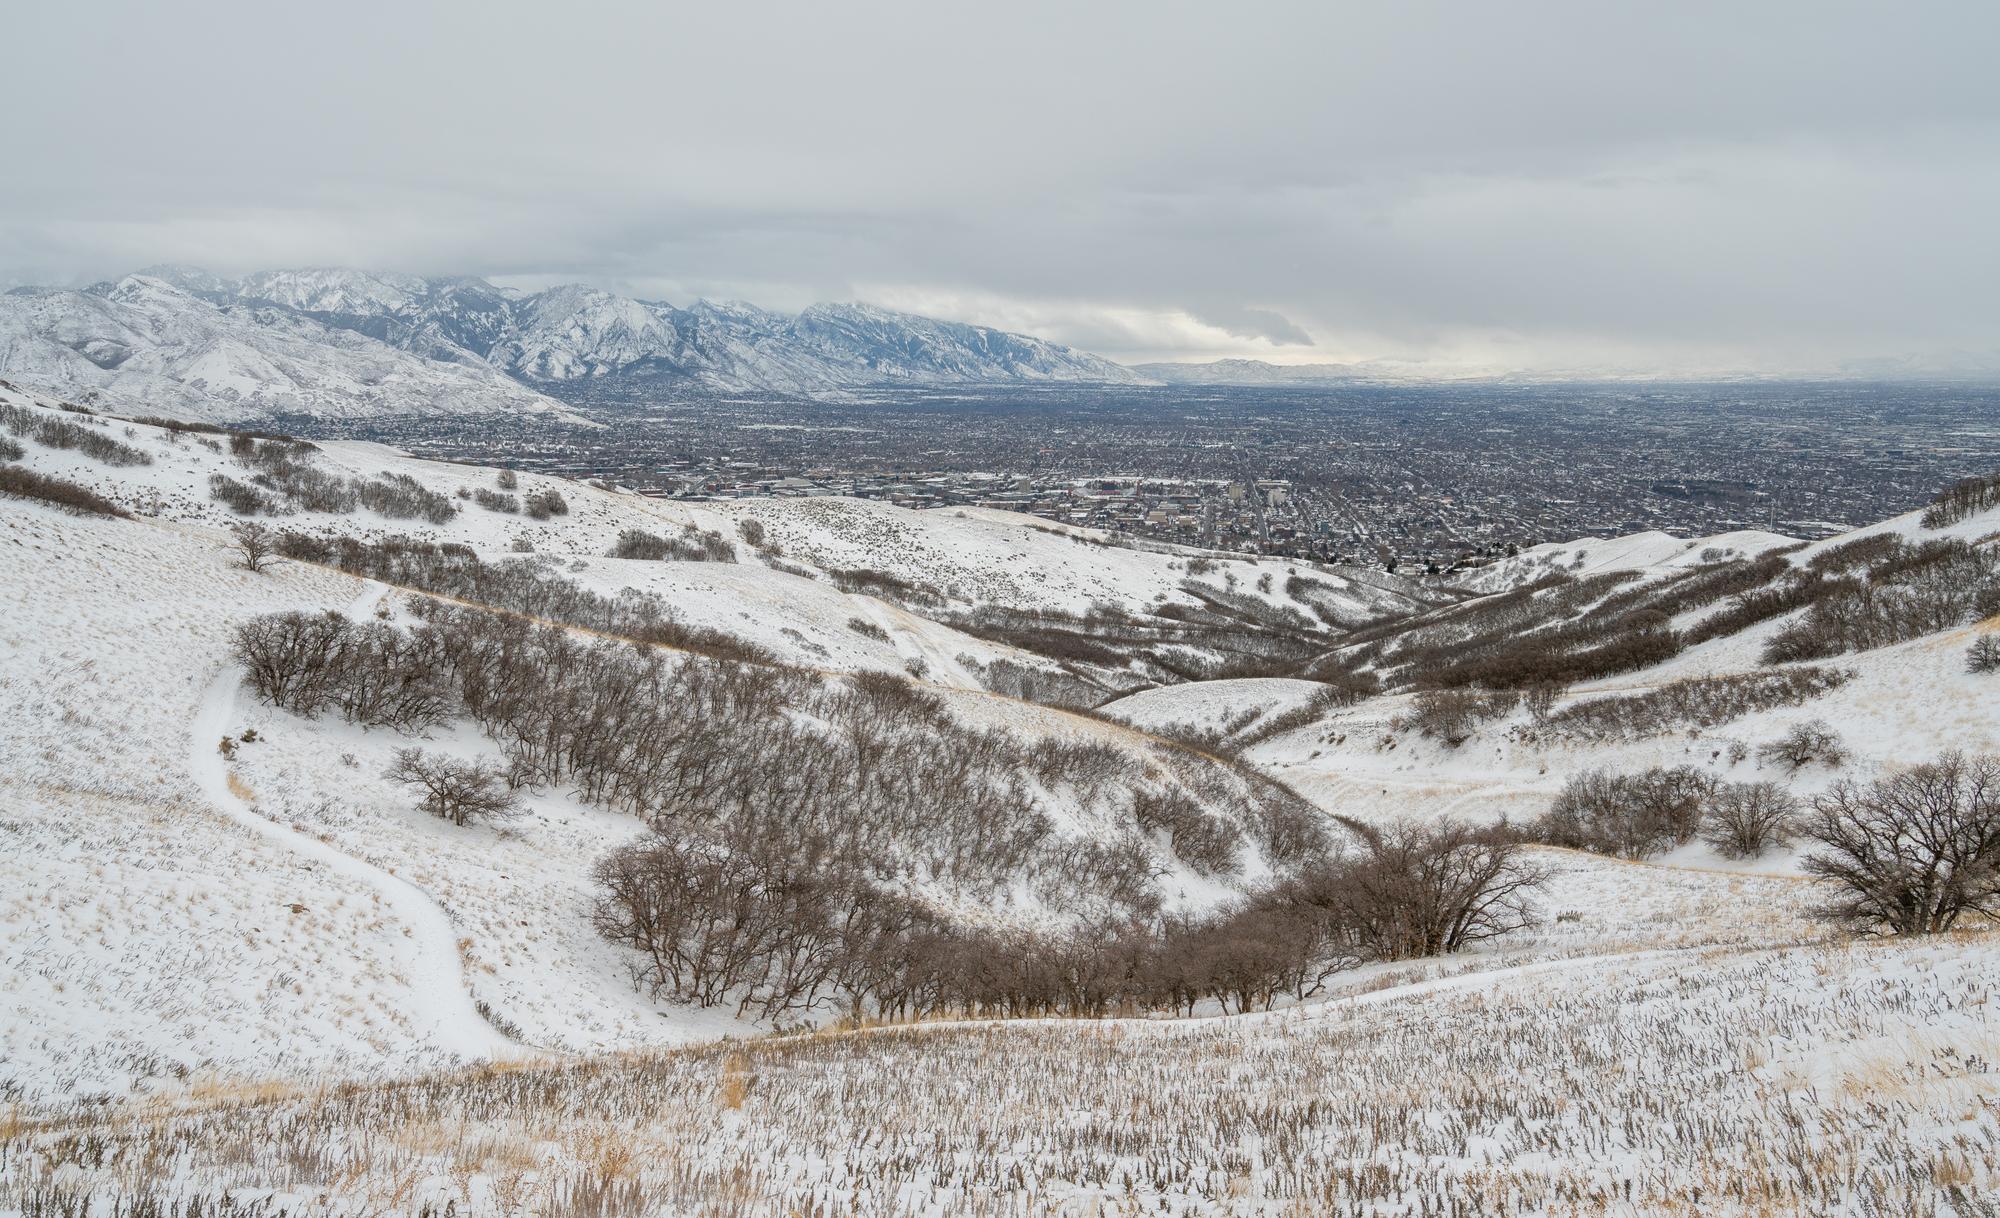 View of Salt Lake Valley from avenues Twin Peaks trail.